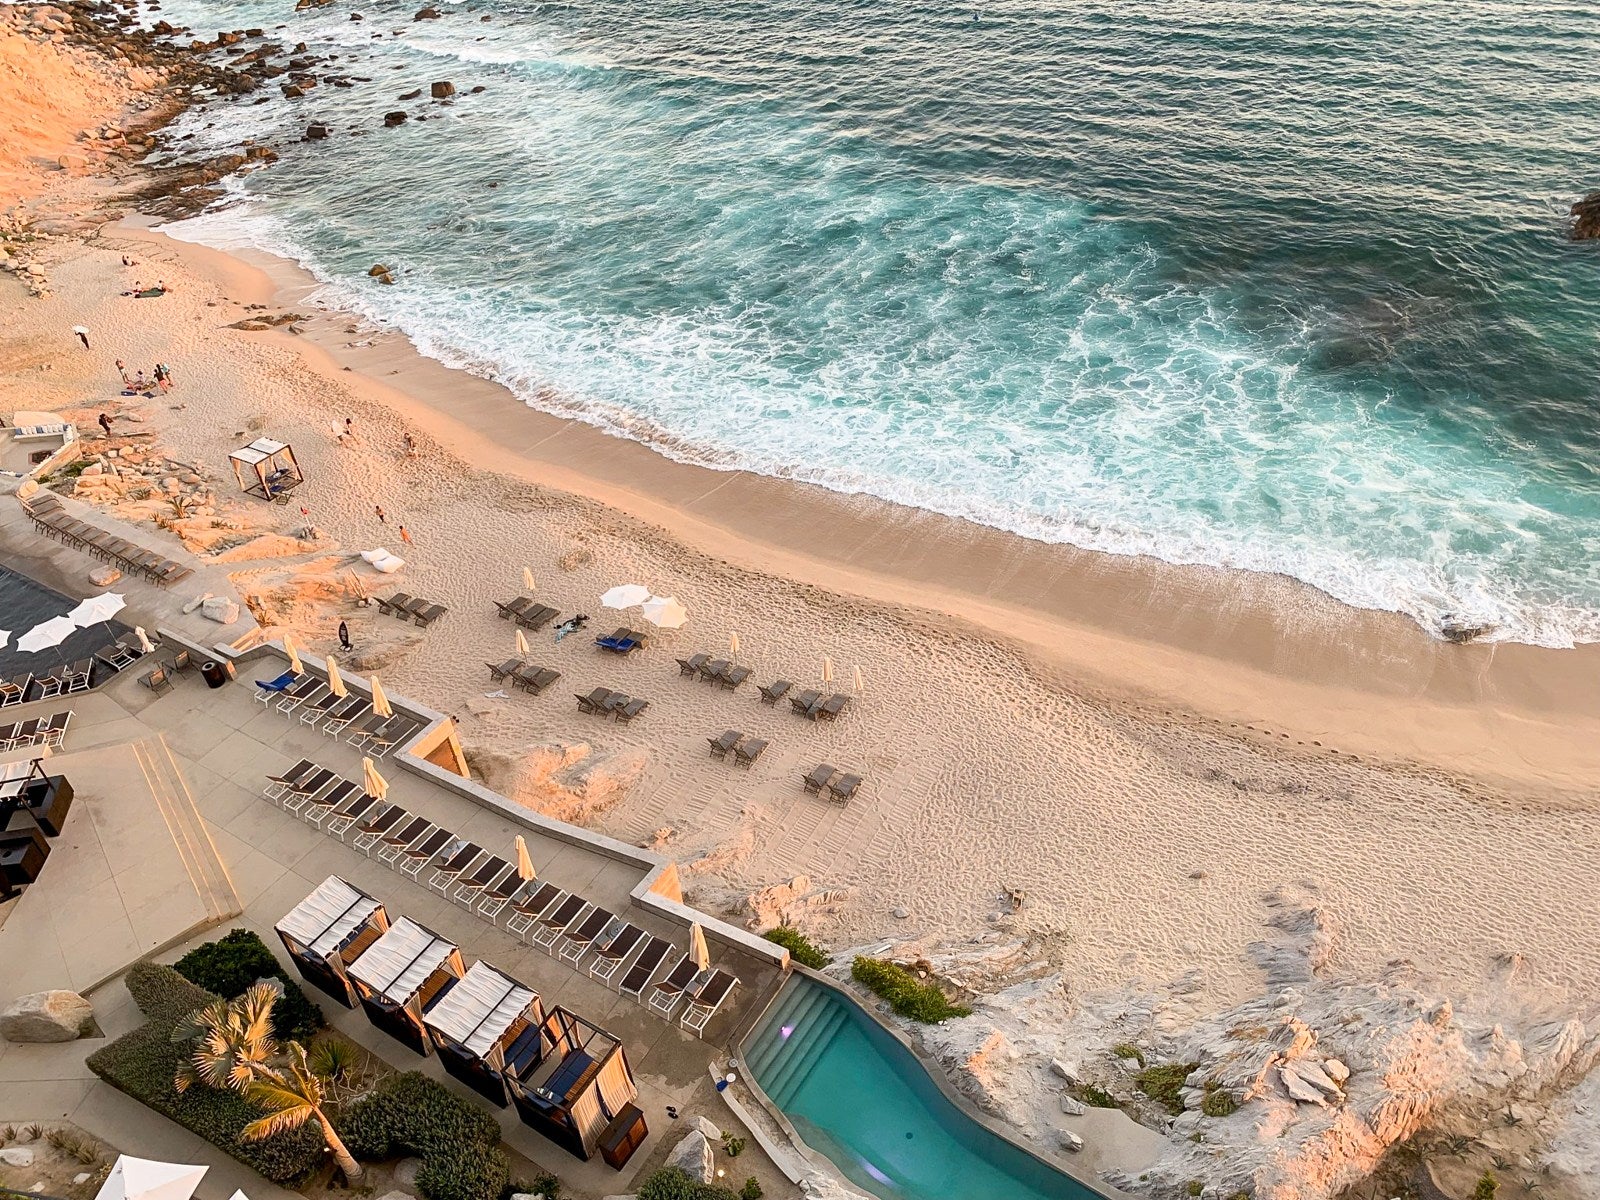 View of the beach and ocean in Los Cabos